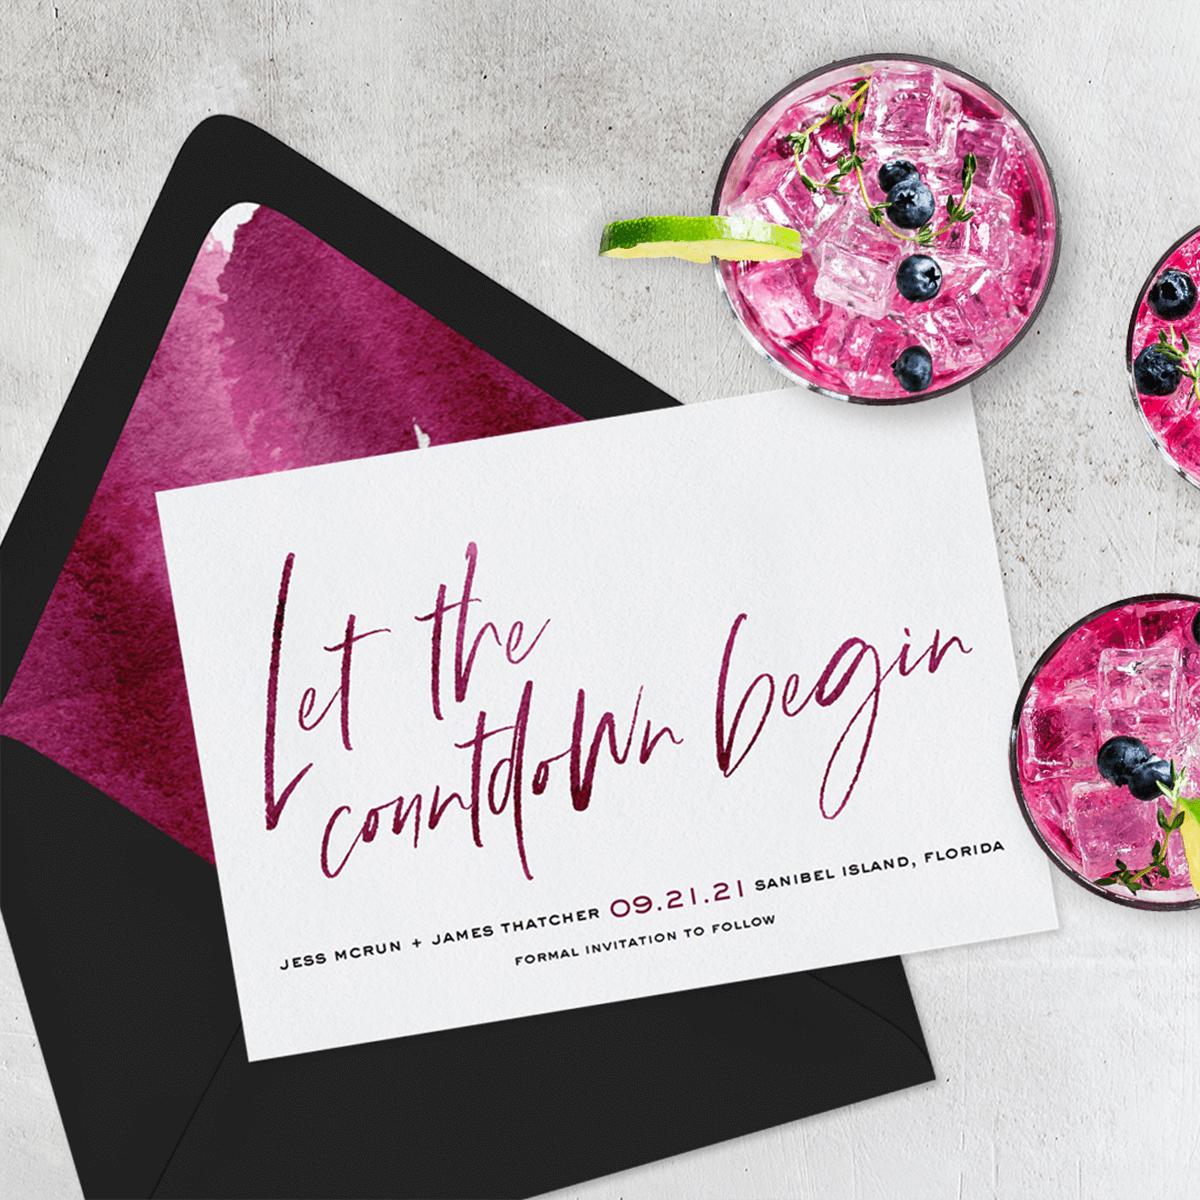 Find the Best Wedding Save the Dates - Paper and Digital